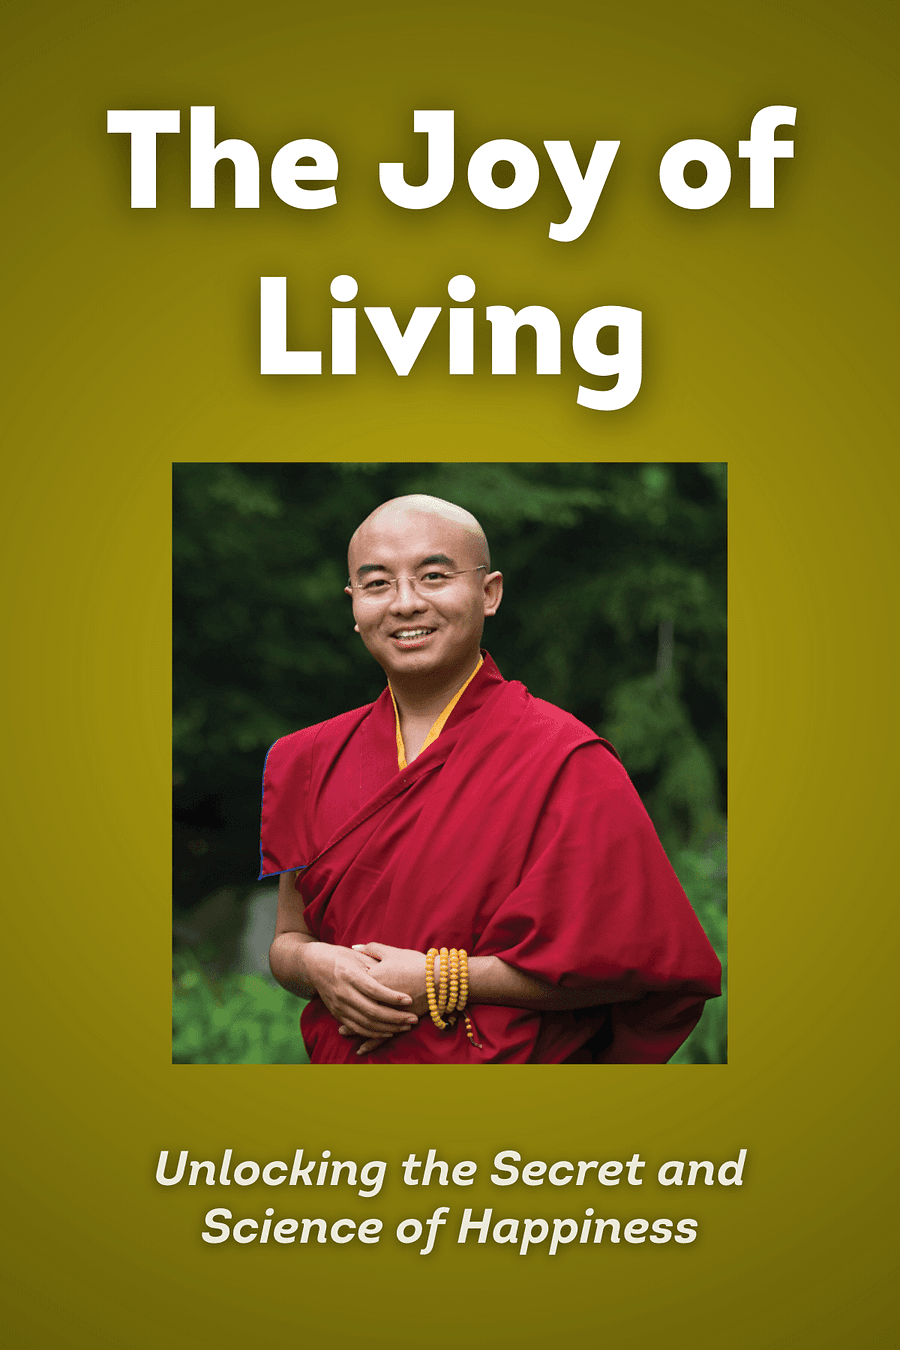 The Joy of Living by Eric Swanson, Yongey Rinpoche Mingyur - Book Summary